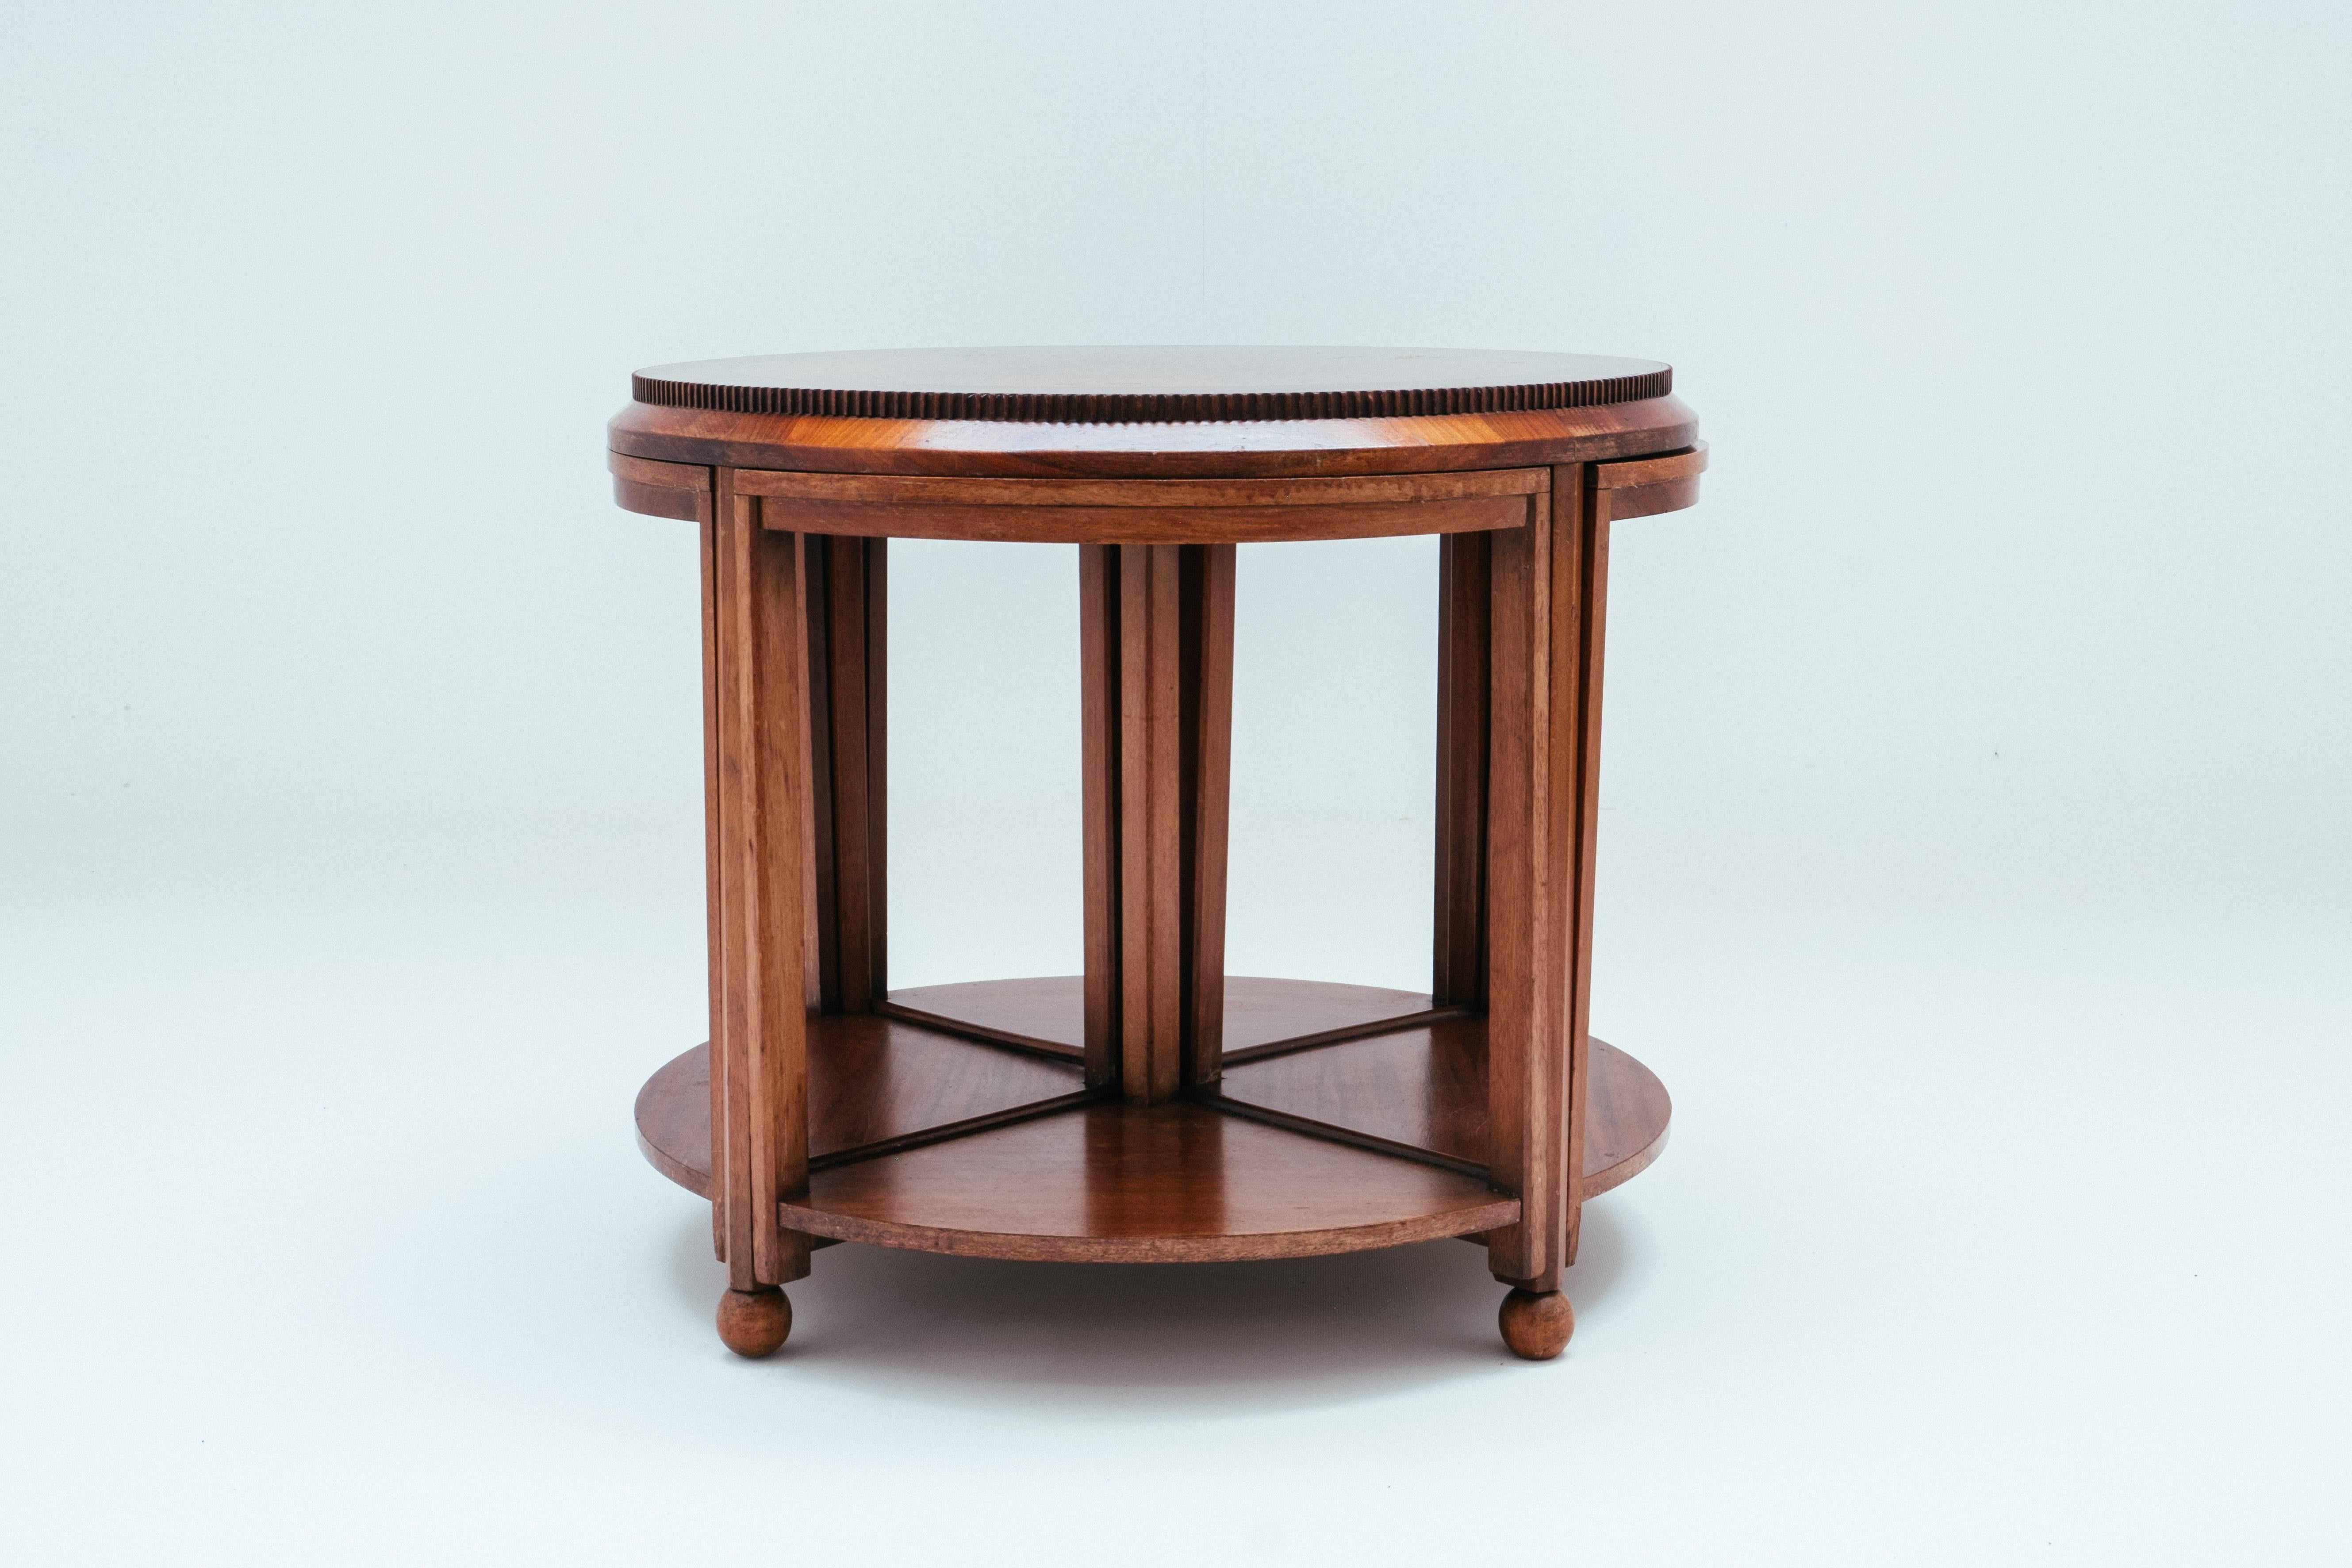 A truly great and unusual production by De Coene in mahogany and walnut. It does not come with a certificate but it has been confirmed by the De Coene specialist Mr Hostens that this is a De Coene design and fabrication.
The technicality and way of